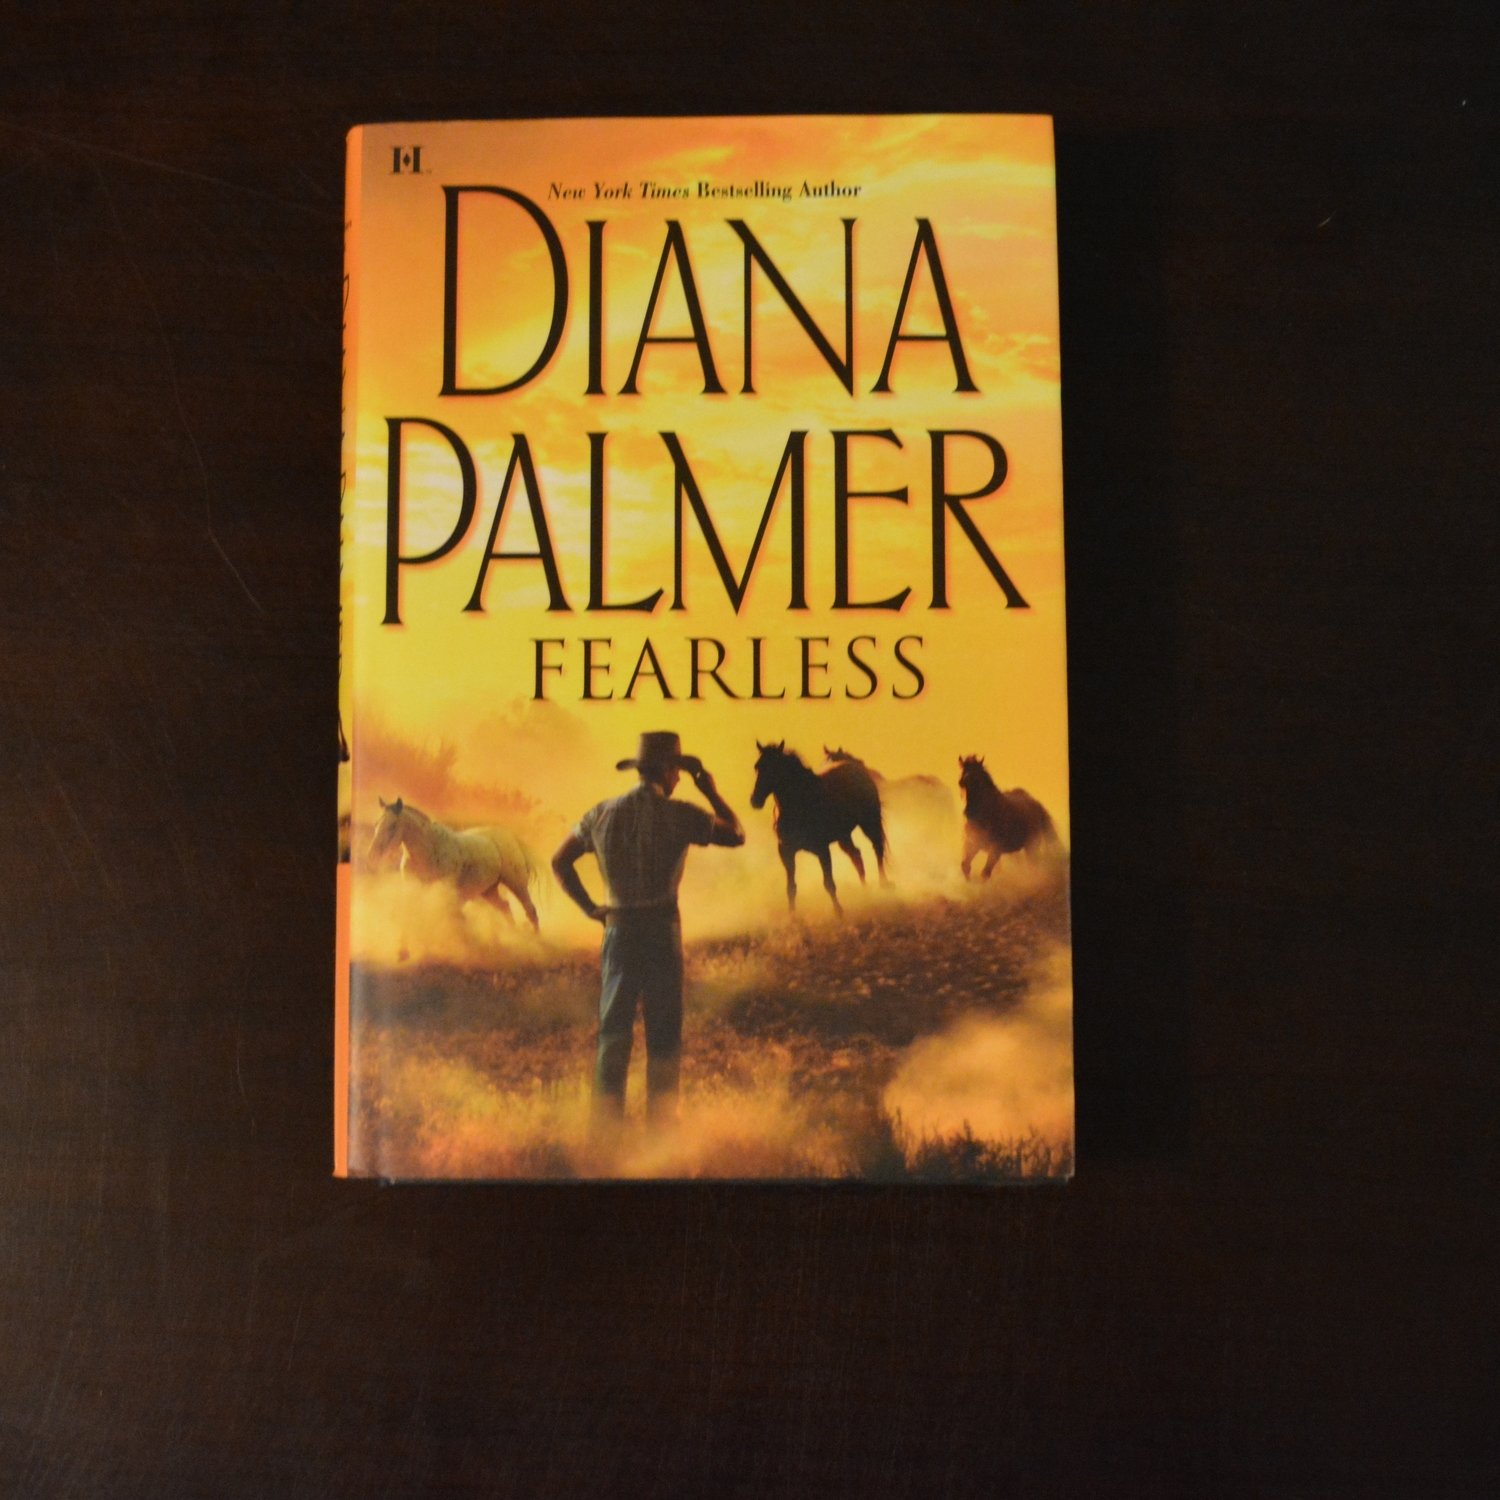 Fearless by Diana Palmer